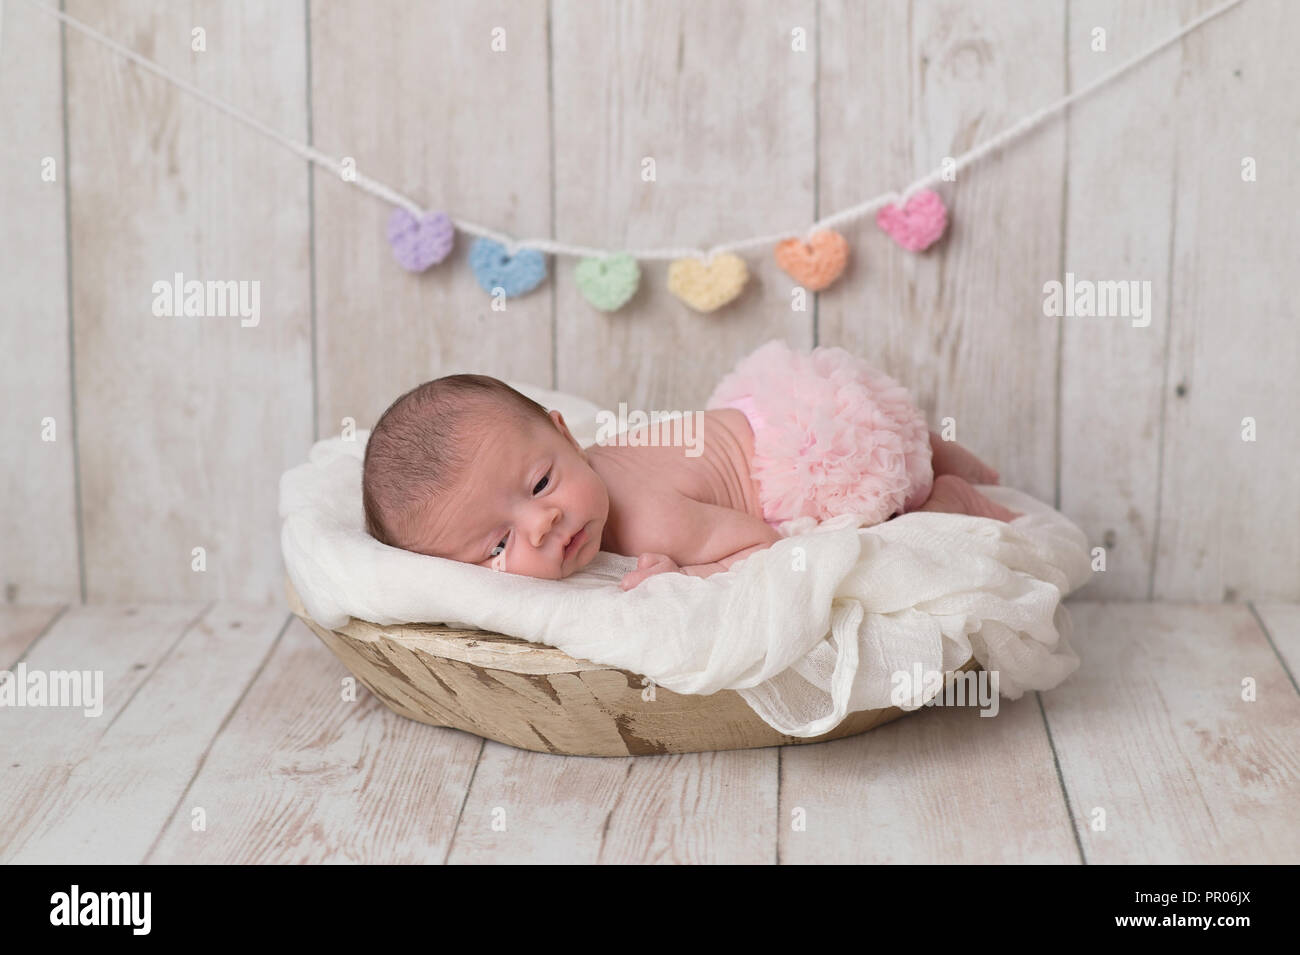 Portrait of a 2 week old newborn baby girl wearing frilly, pink bloomers. She is lying in a wooden bowl and there is a heart garland in the background Stock Photo